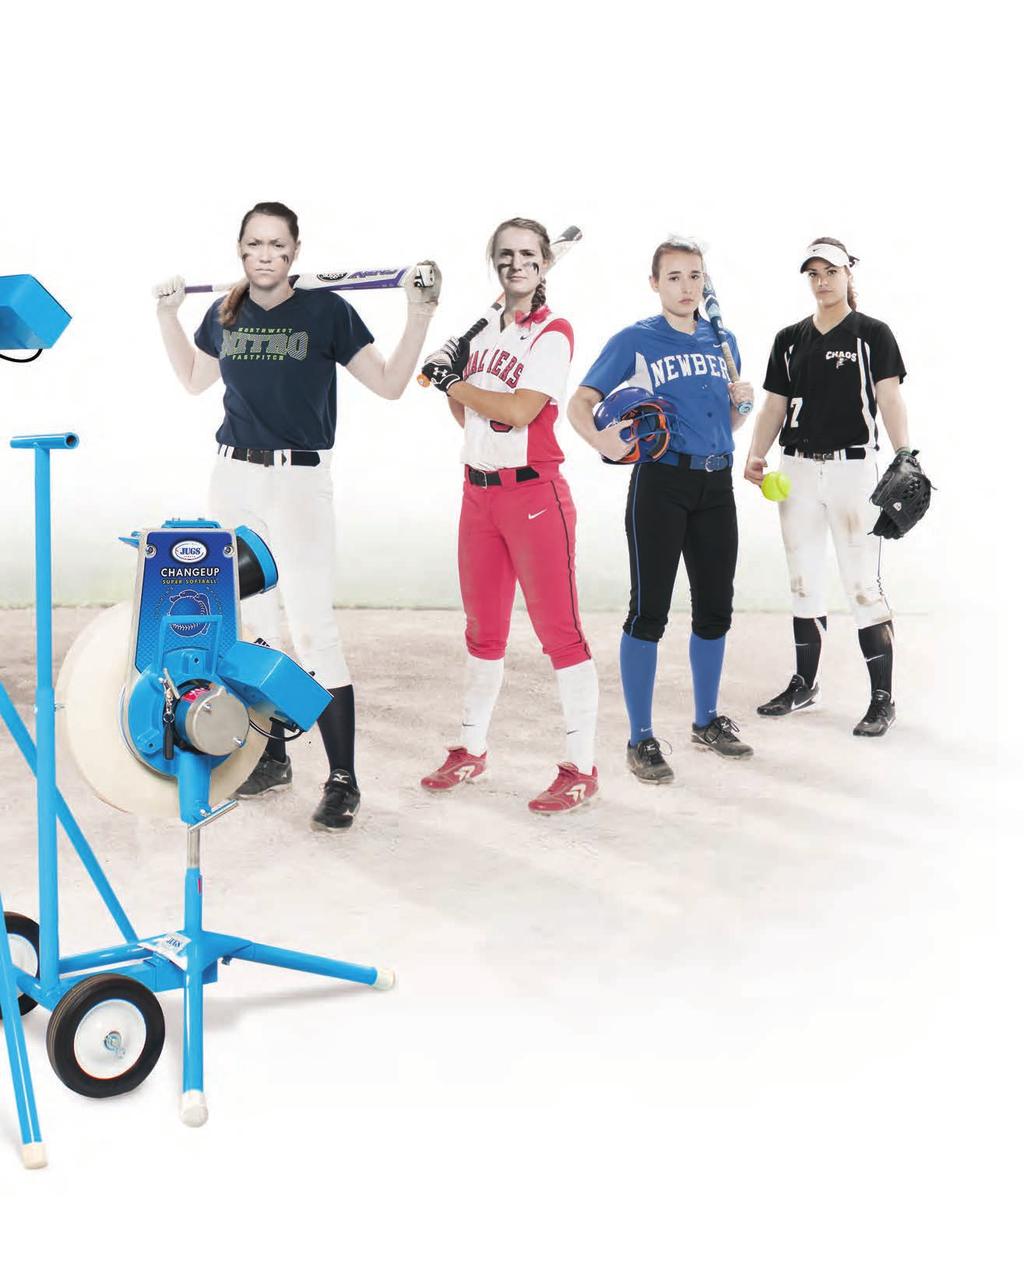 Introducing the next generation of JUGS Pitching Machines.